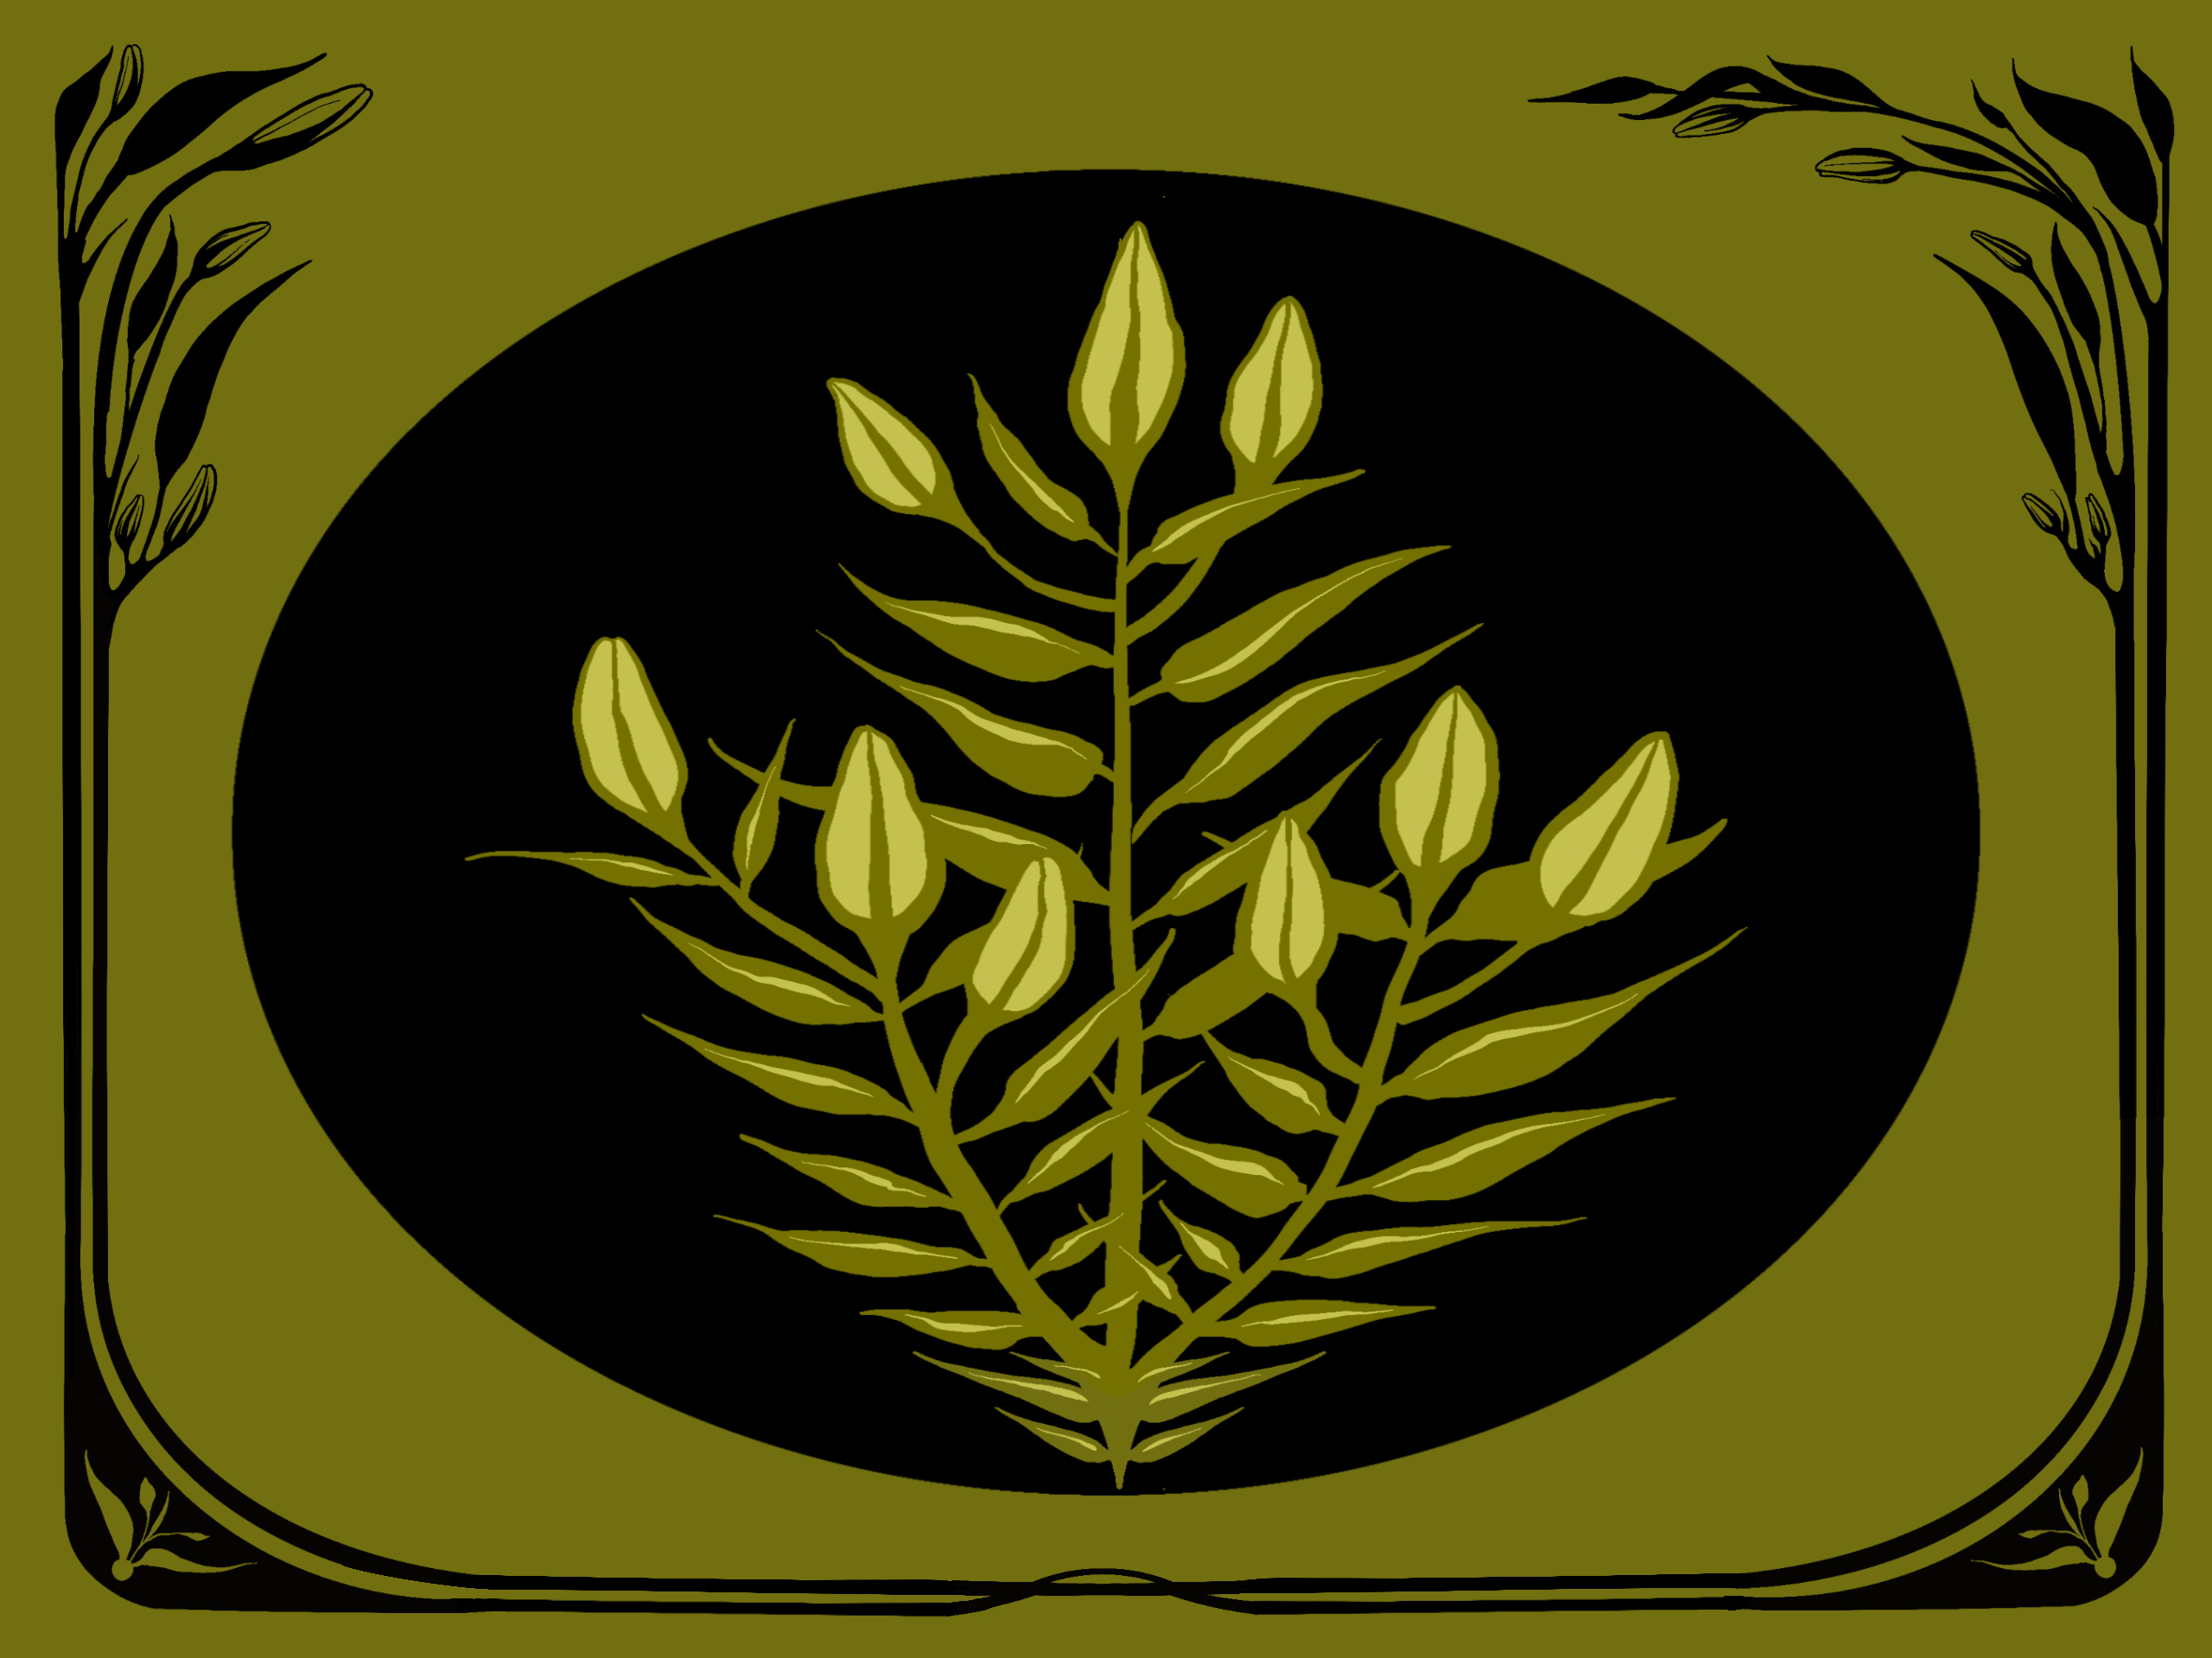 Image: An illustration of three milkweed stalks with three pods on the top of each leafy stalk stalk. The milkweed plant is set in a black oval, which is surrounded by an olive green background. Running across the bottom is black framing that then grows up the sides into flame-like leaves. Image by Summer Mills.